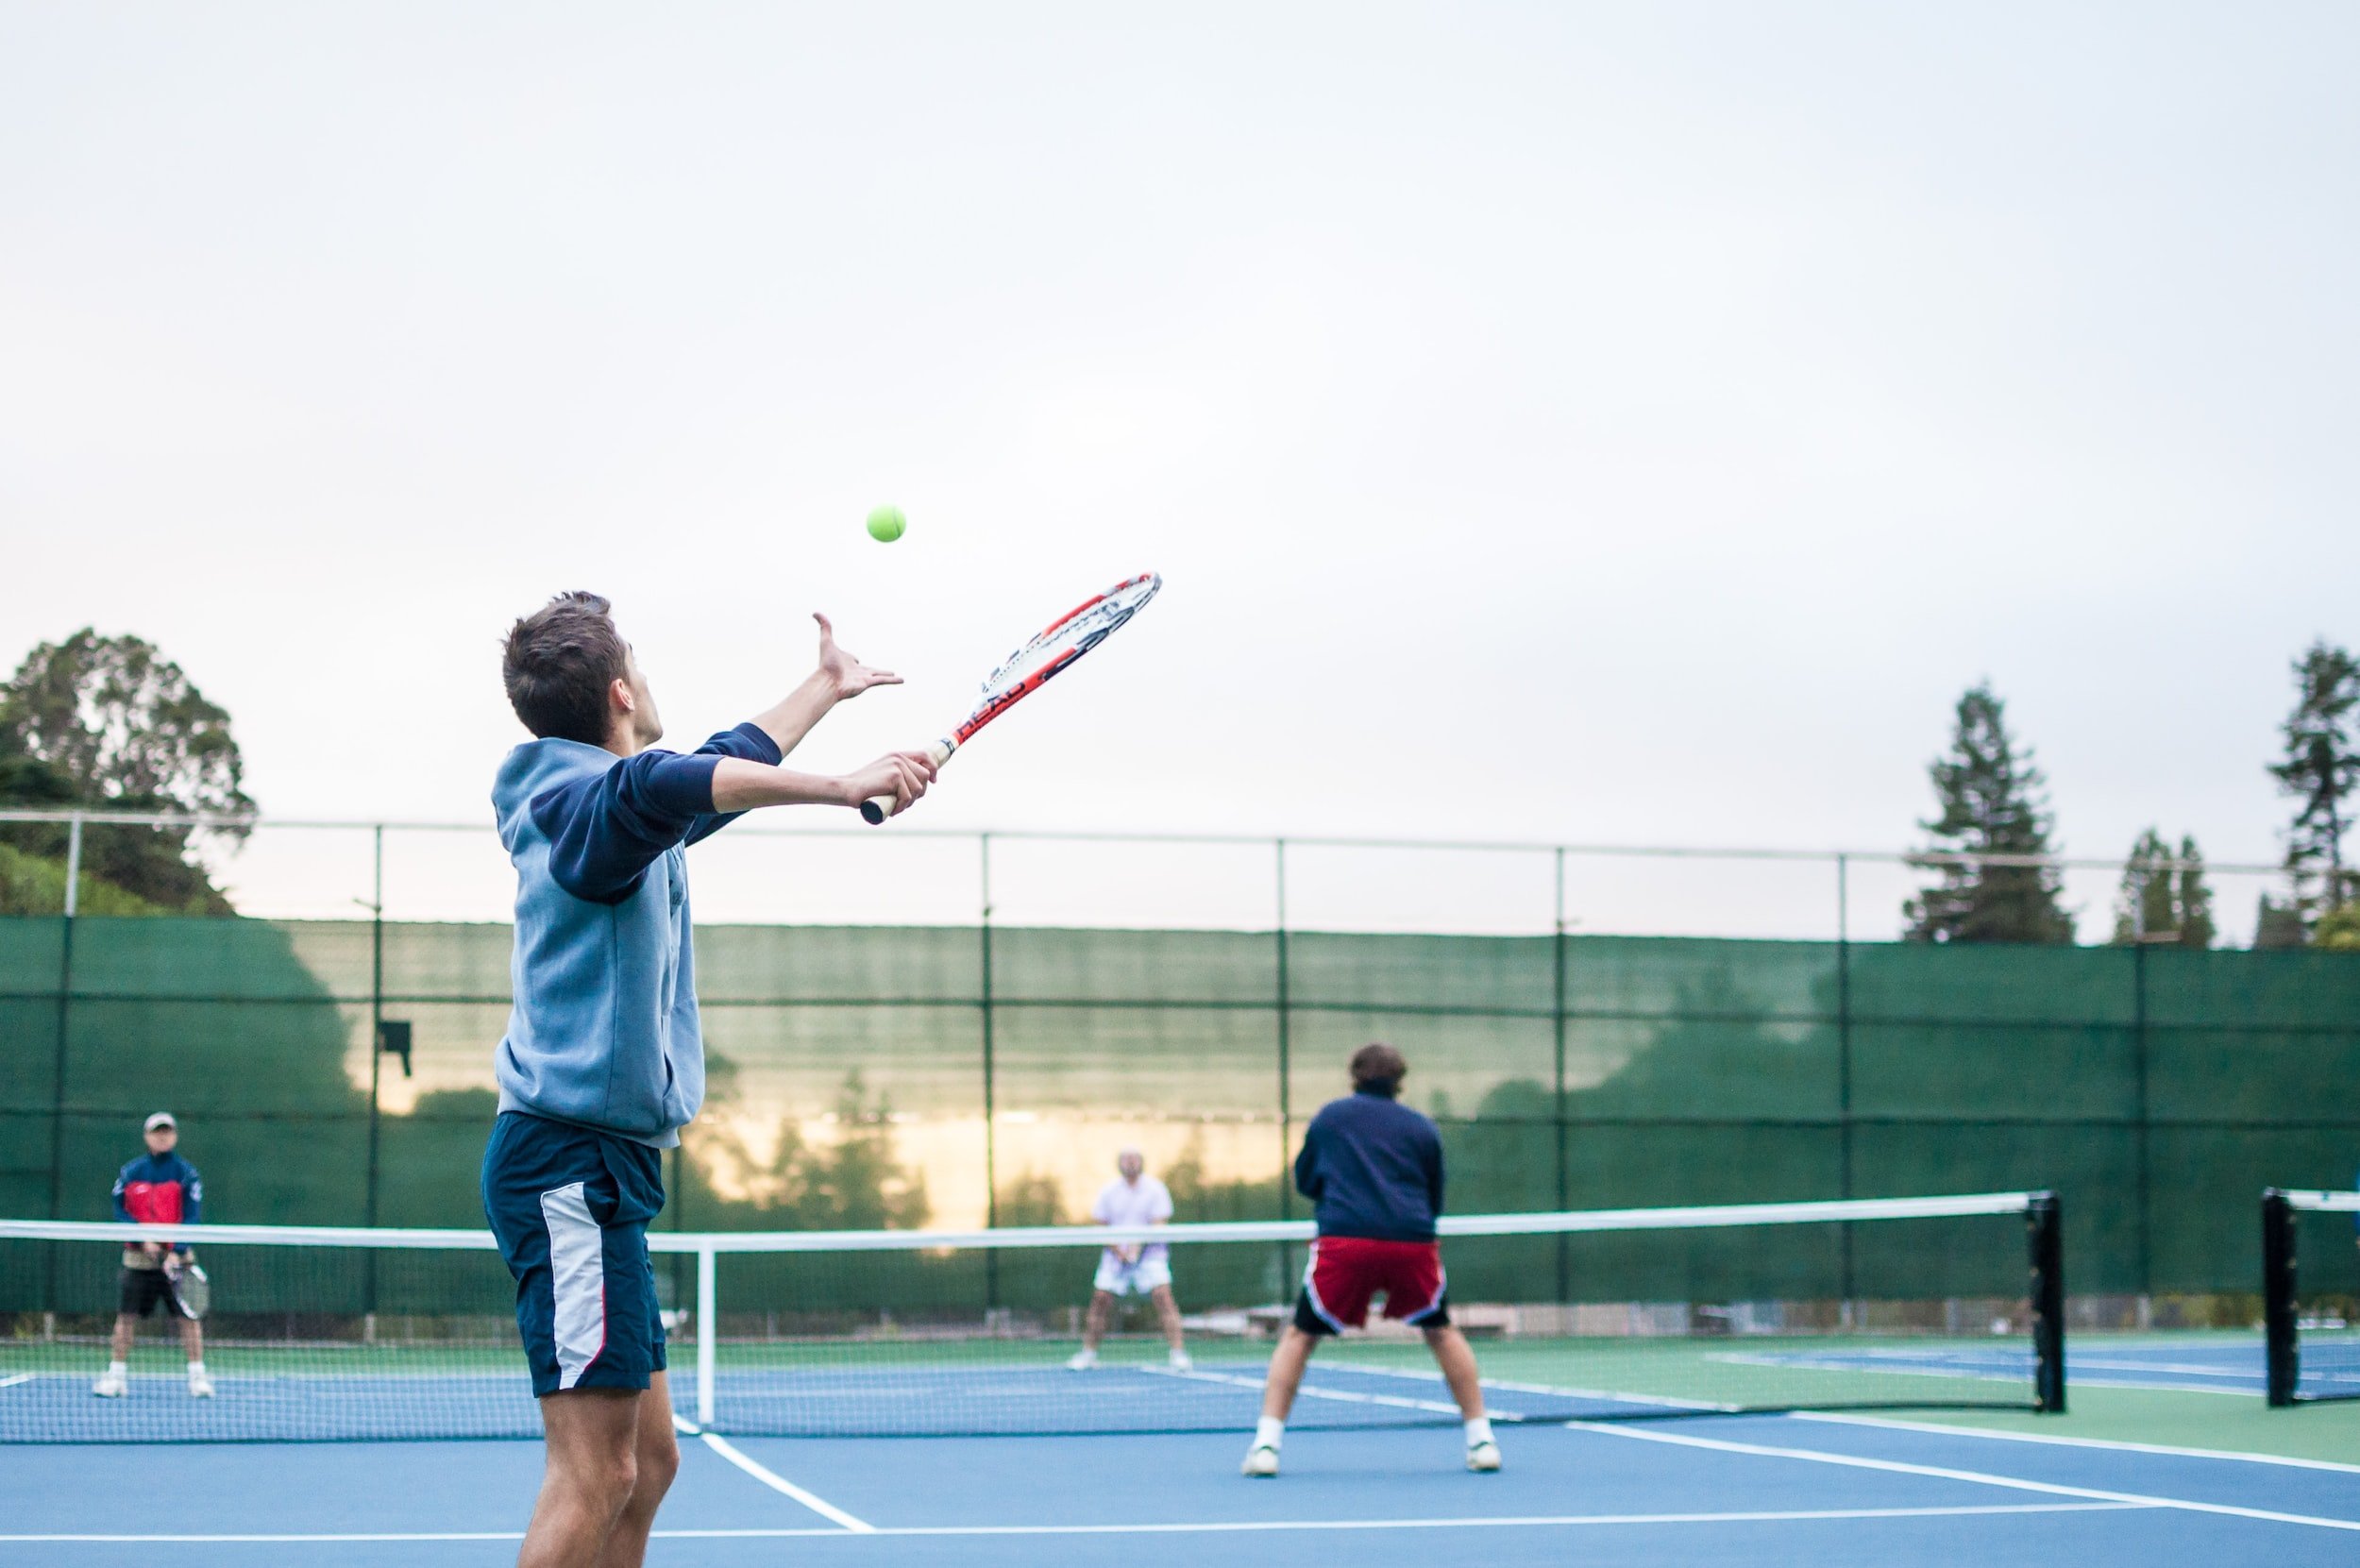 Domain for a company seminar with a tennis court